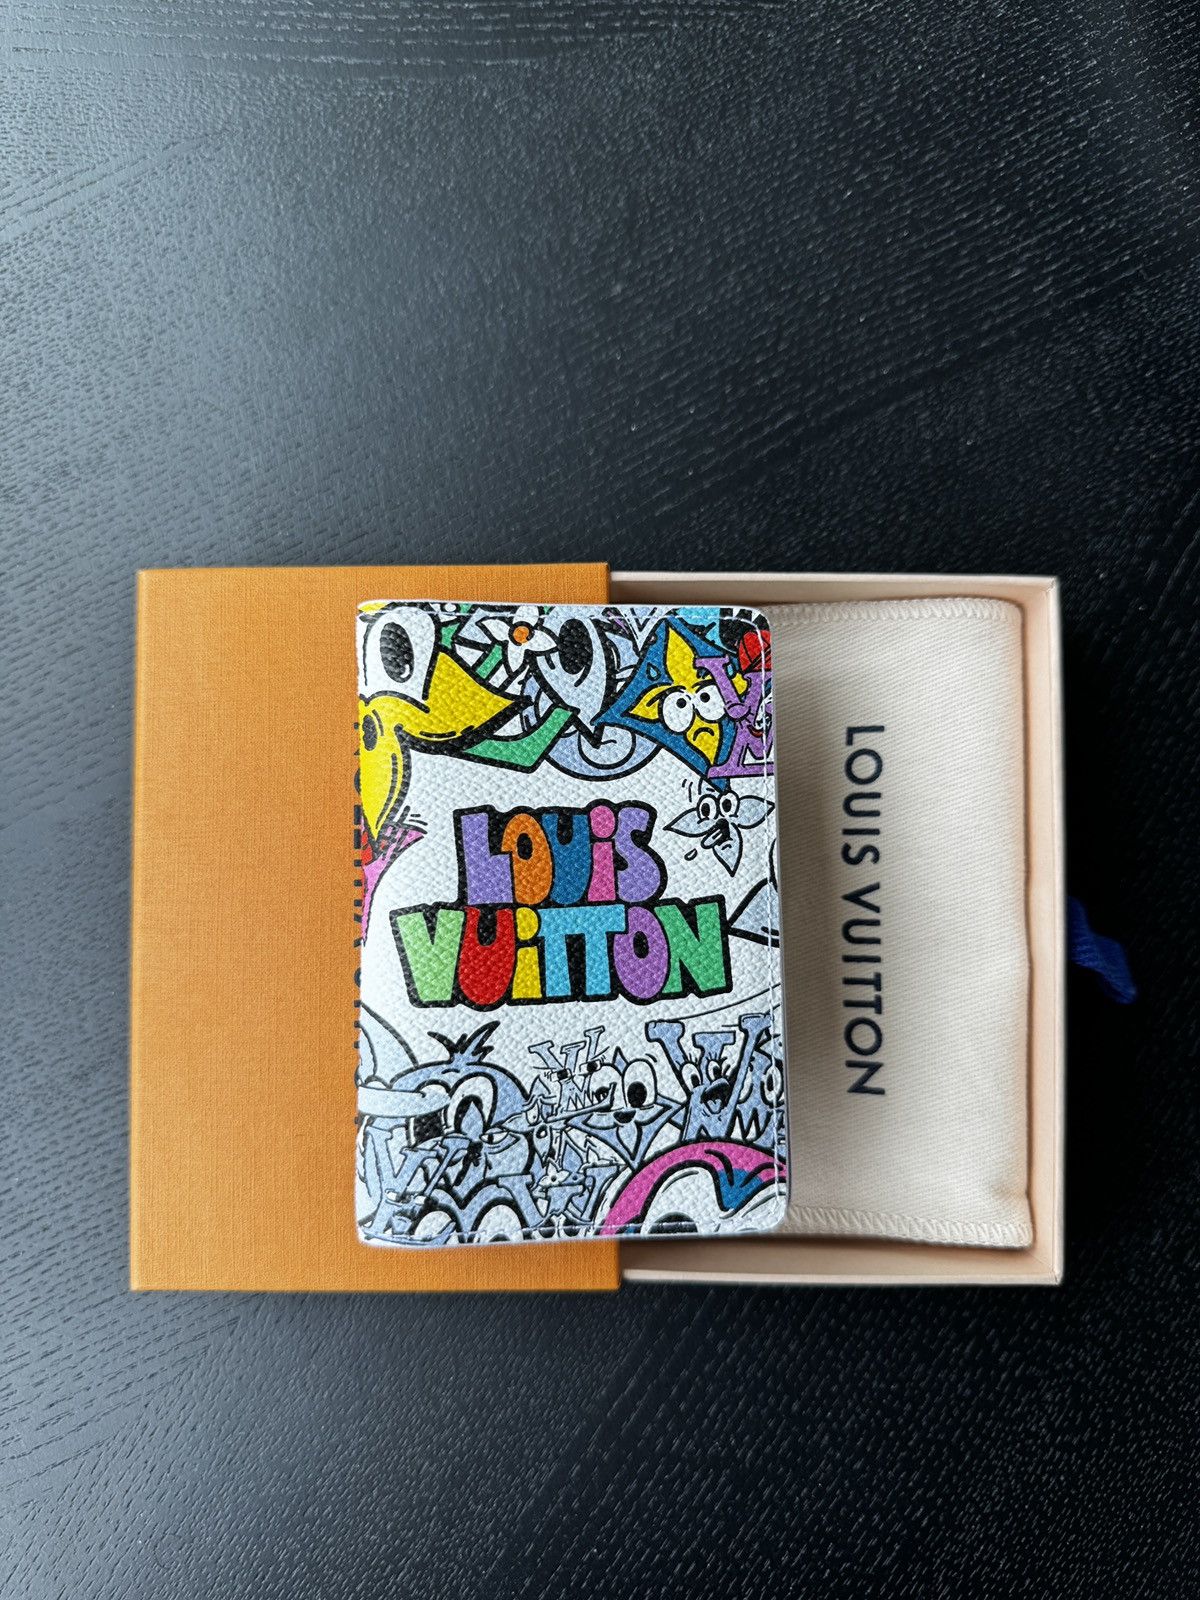 Louis Vuitton Comics Pocket Organizer for Sale in New York, NY